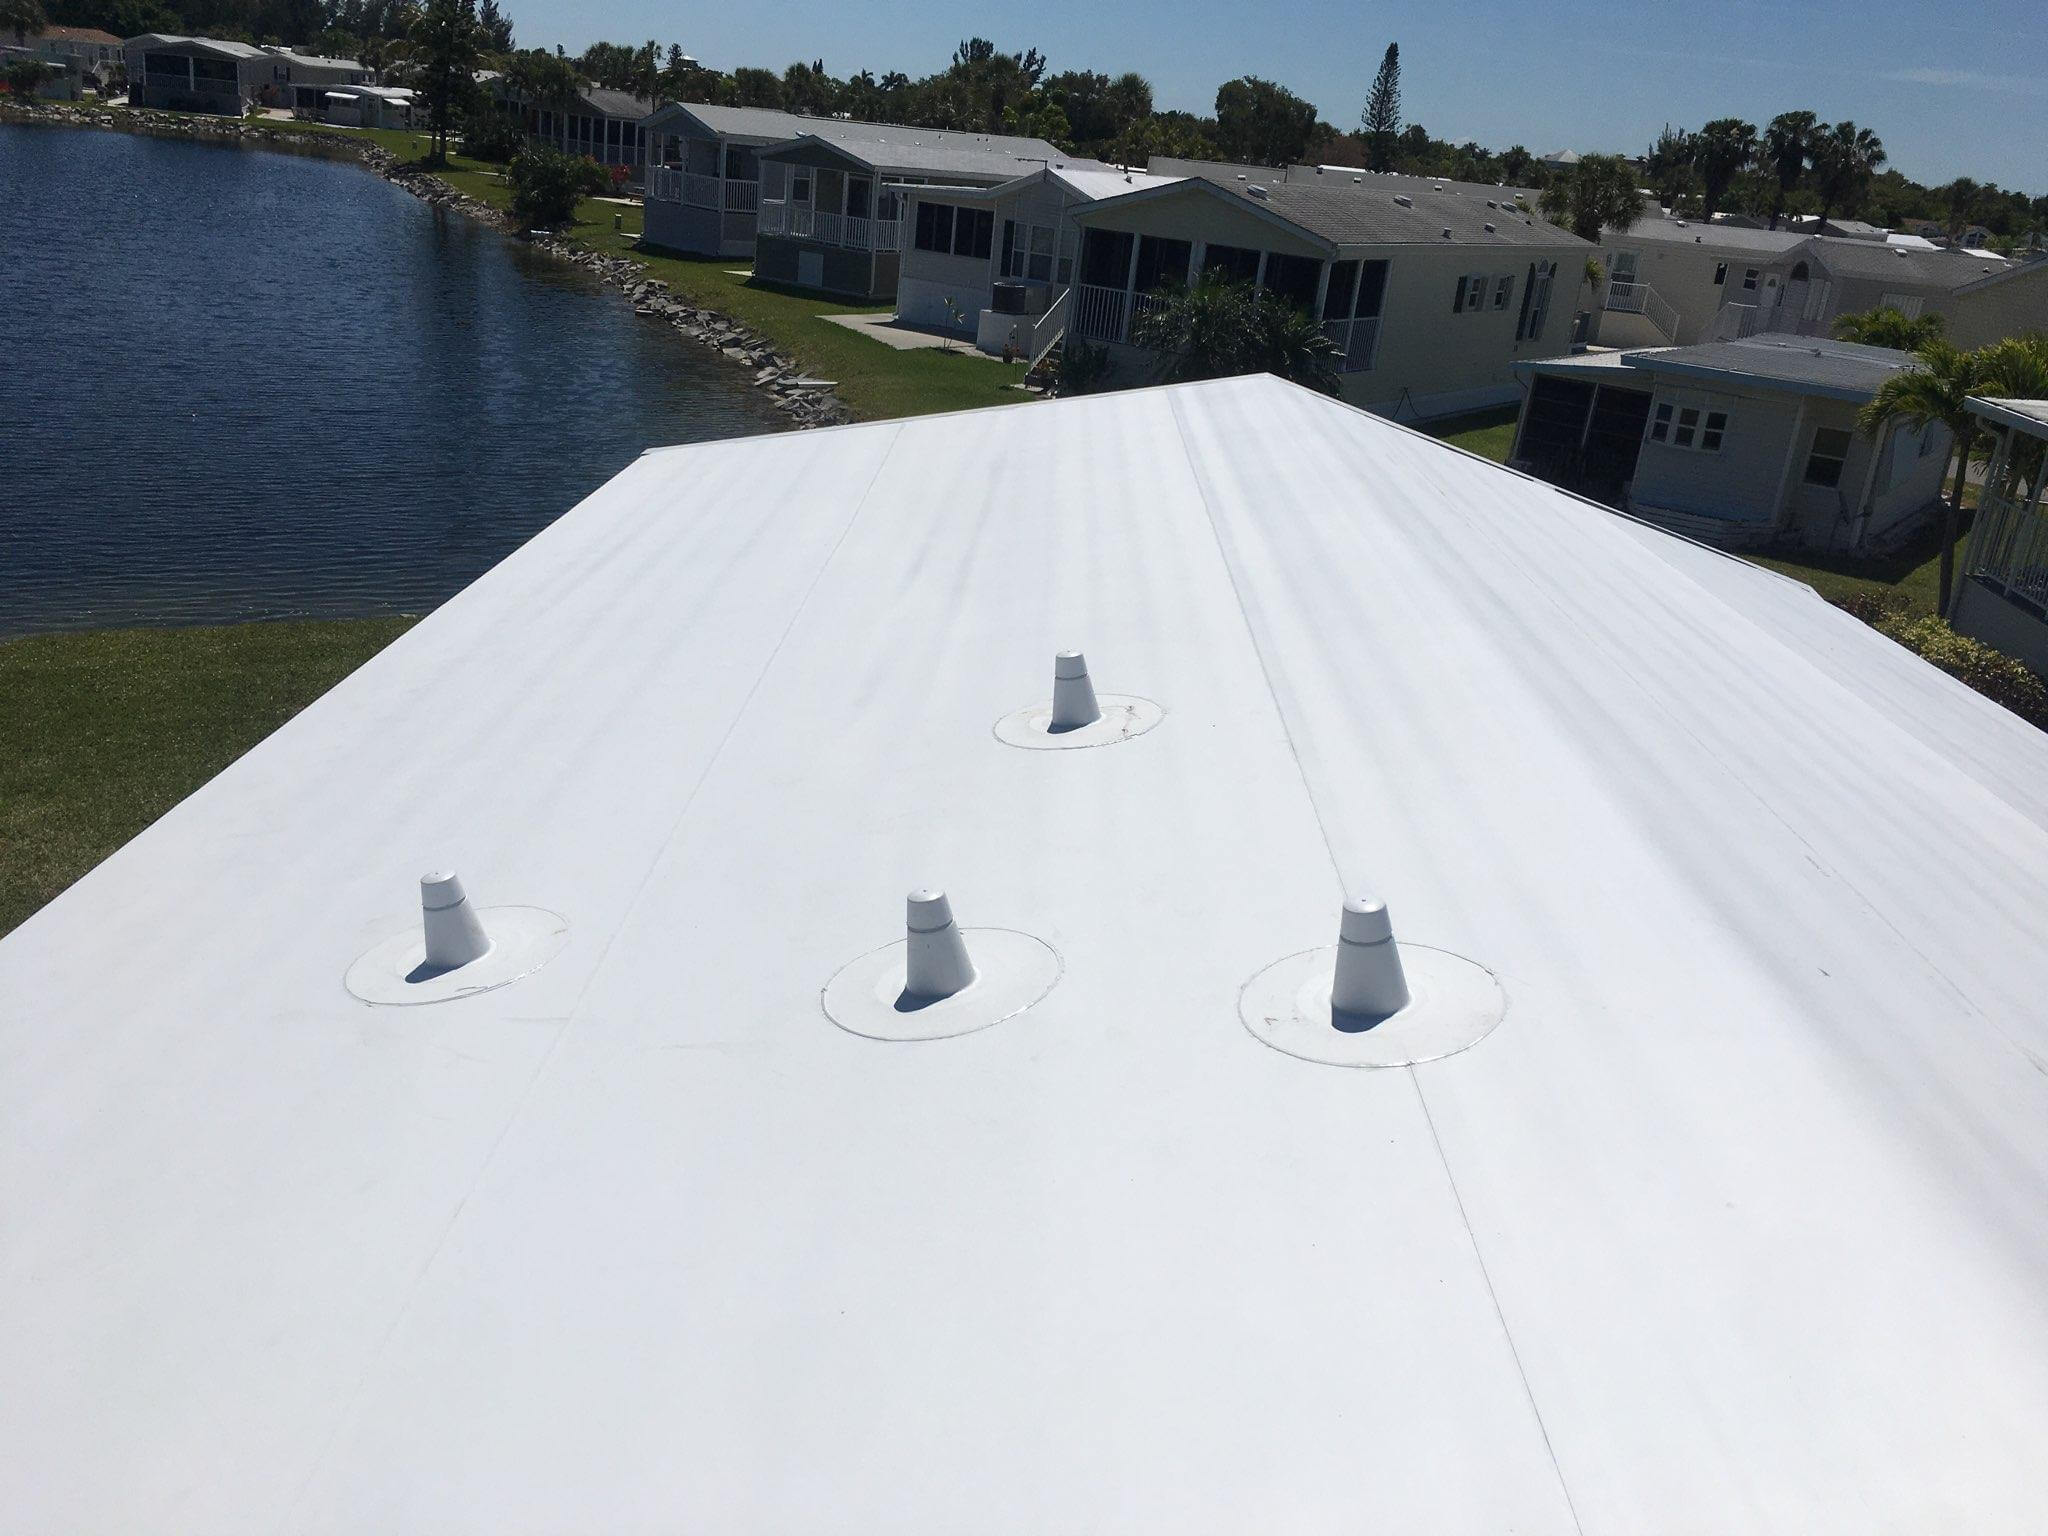 Mobile Home Roof Over